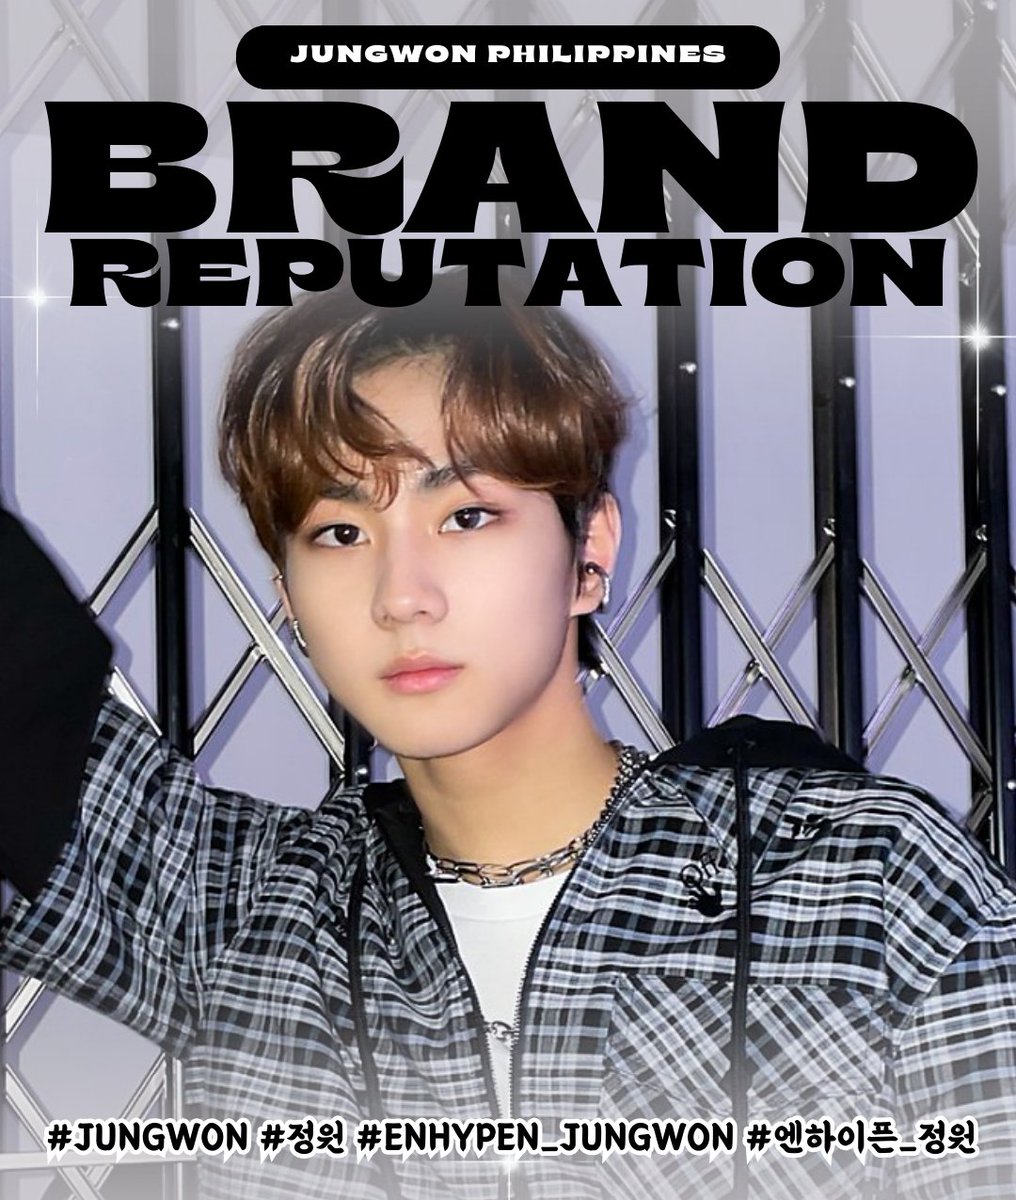 Boost JUNGWON’s Brand Reputation by reposting, replying or using his hashtags here on X! #JUNGWON #정원 #ENHYPEN_JUNGWON #엔하이픈_정원 @ENHYPEN @ENHYPEN_members